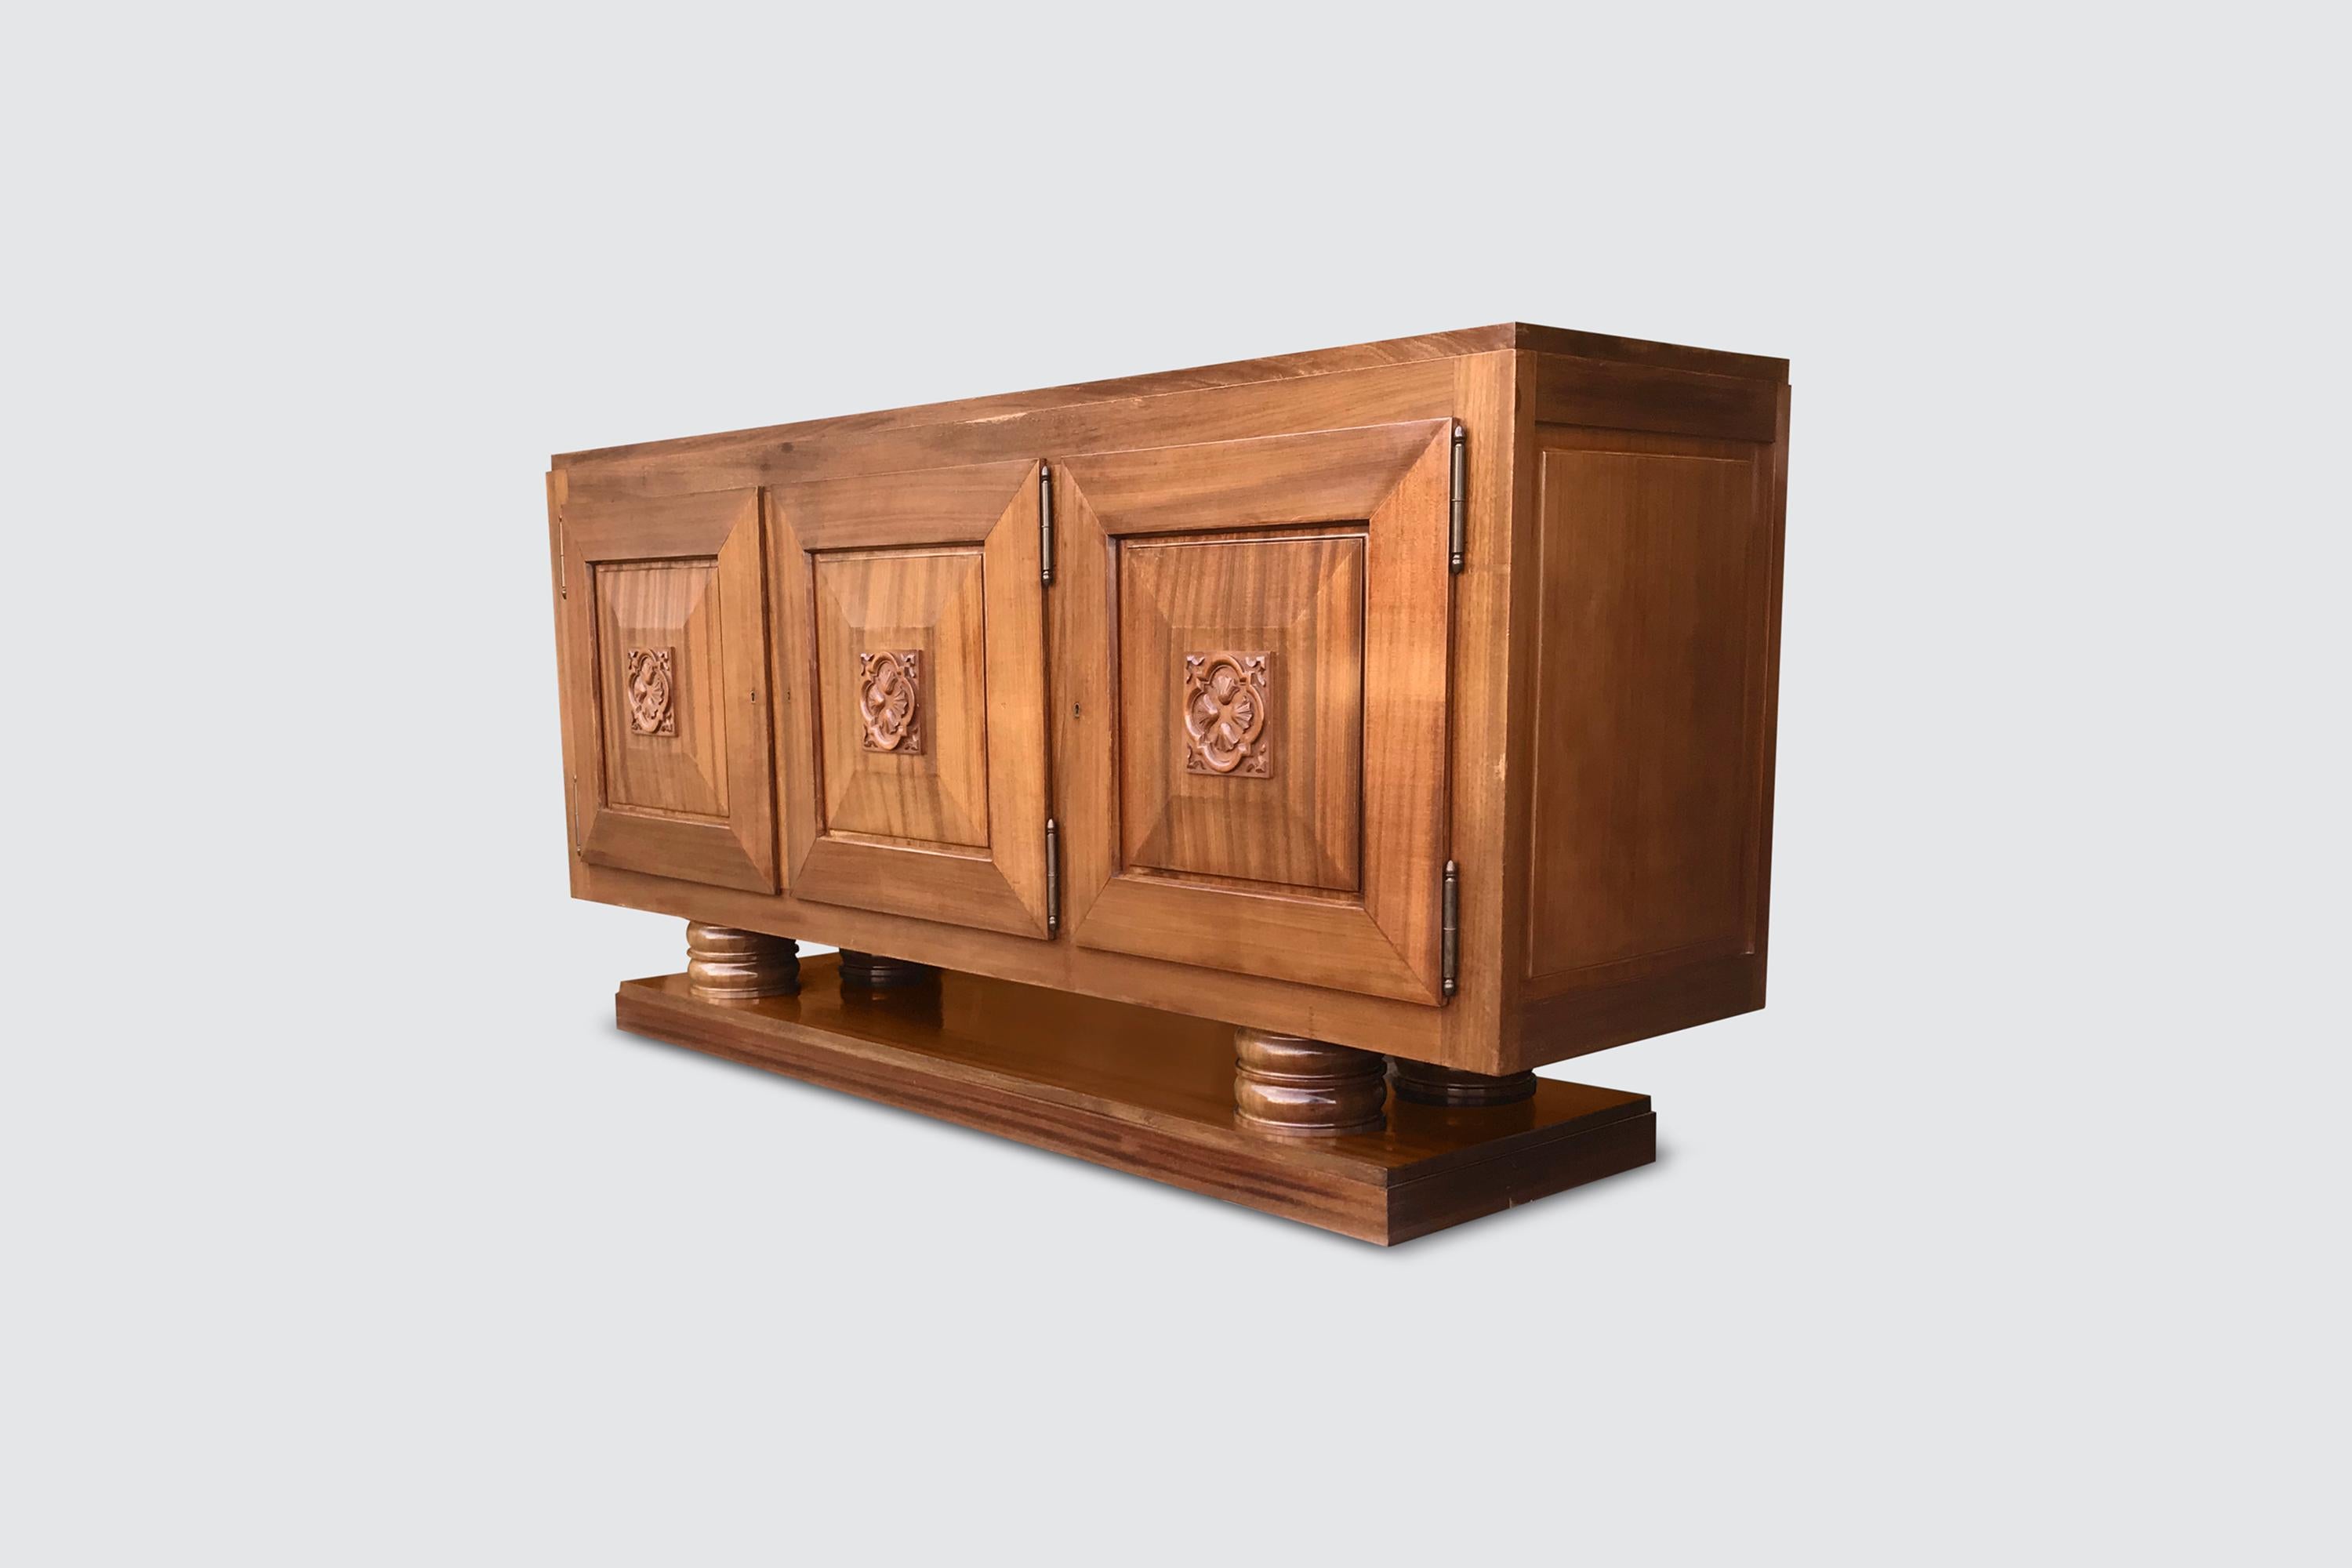 Beautifully sculpted art deco credenza by Gaston Poisson in solid mahogany wood.

The design is characterized by 2 round columns on each side that provides for a floating effect of the upper body. Interestingly offset against the bulky body, the